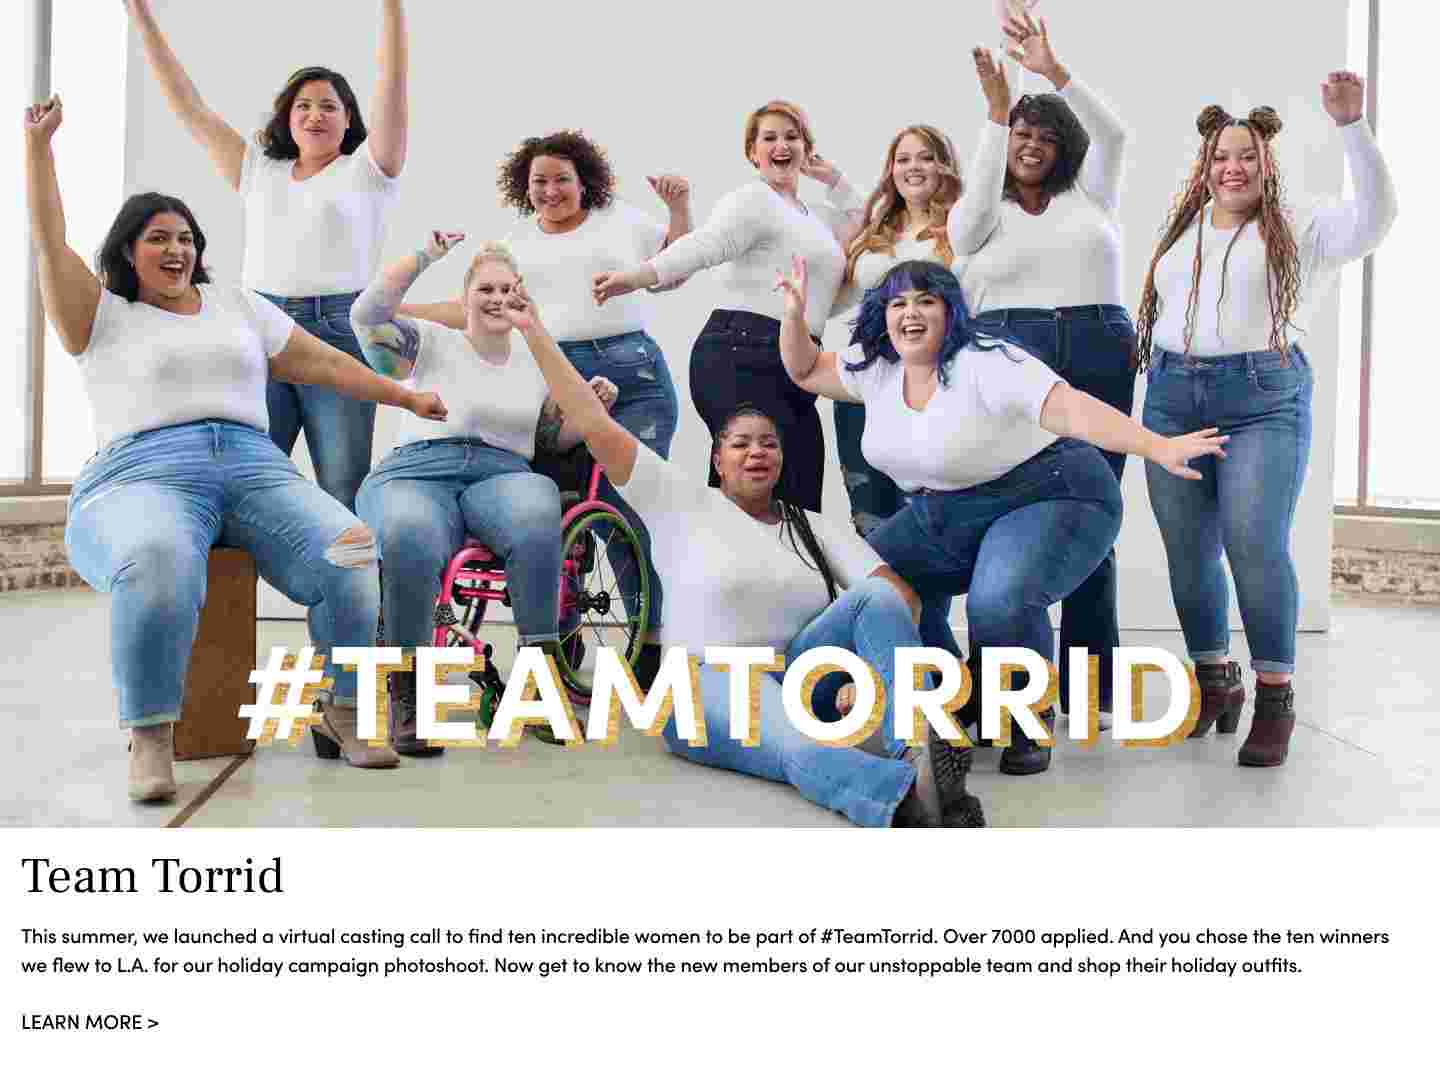 Torrid Cash Earn Online + In Store Find Out More. Earn Torrid Cash We giv eyou $25 in Torrid Cash for every $50 you spend | Stockpile it all the torrid cash you earn is loaded right in to your torrid reward account | redeem it redeem $25 torrid cash when you spend $50 on regular price items